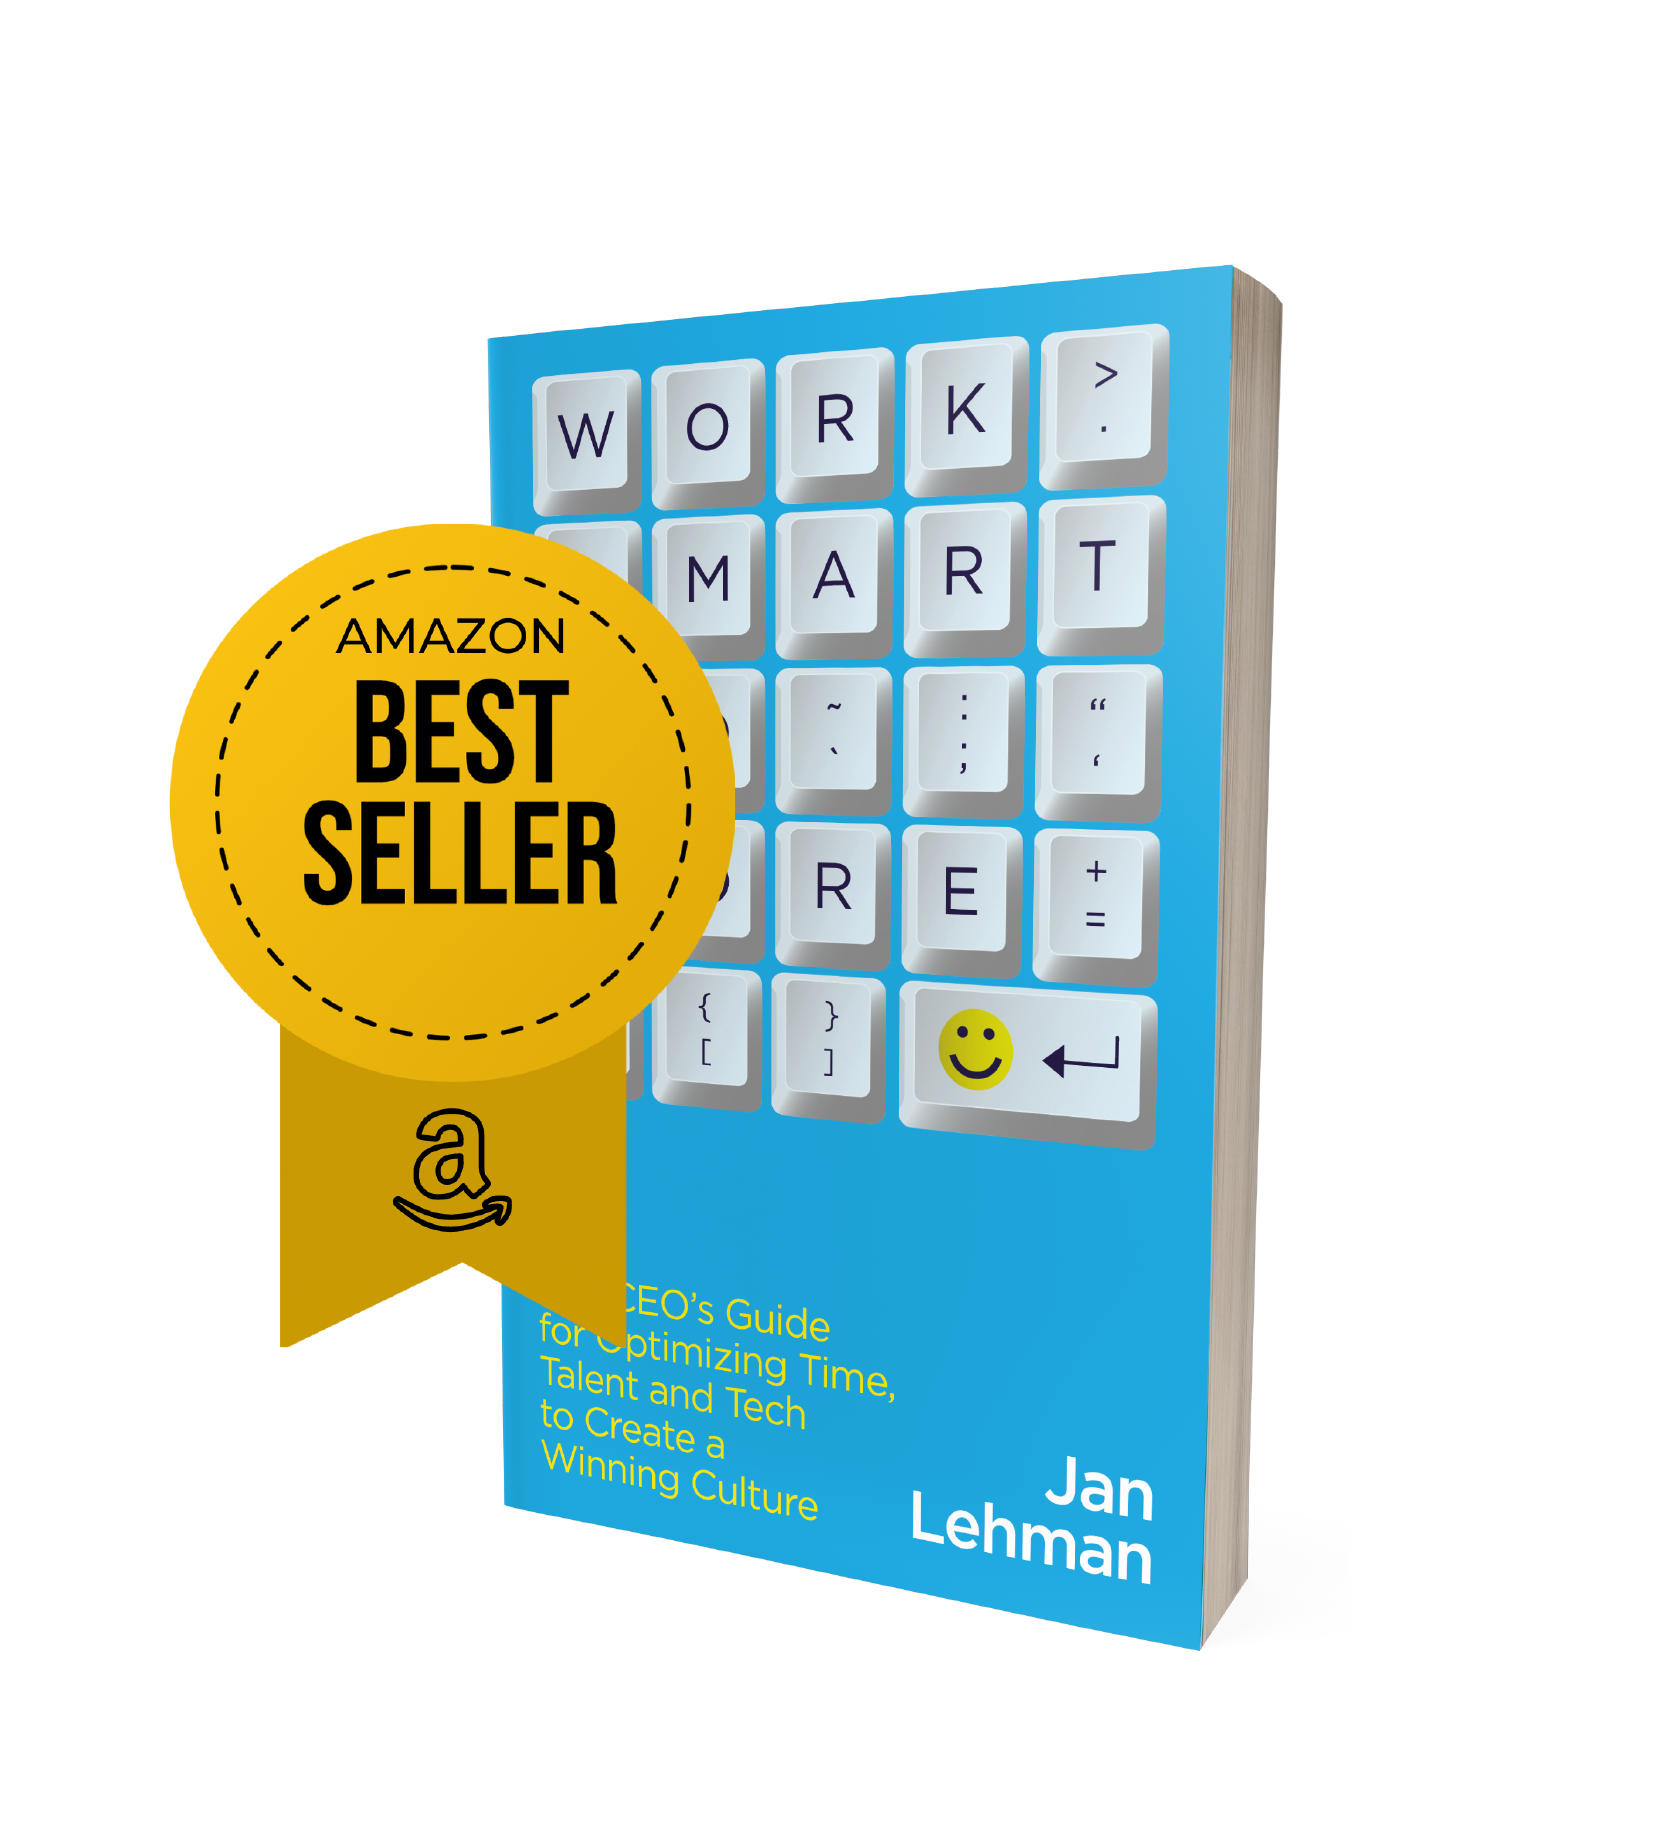 Book With Bestseller Ribbon